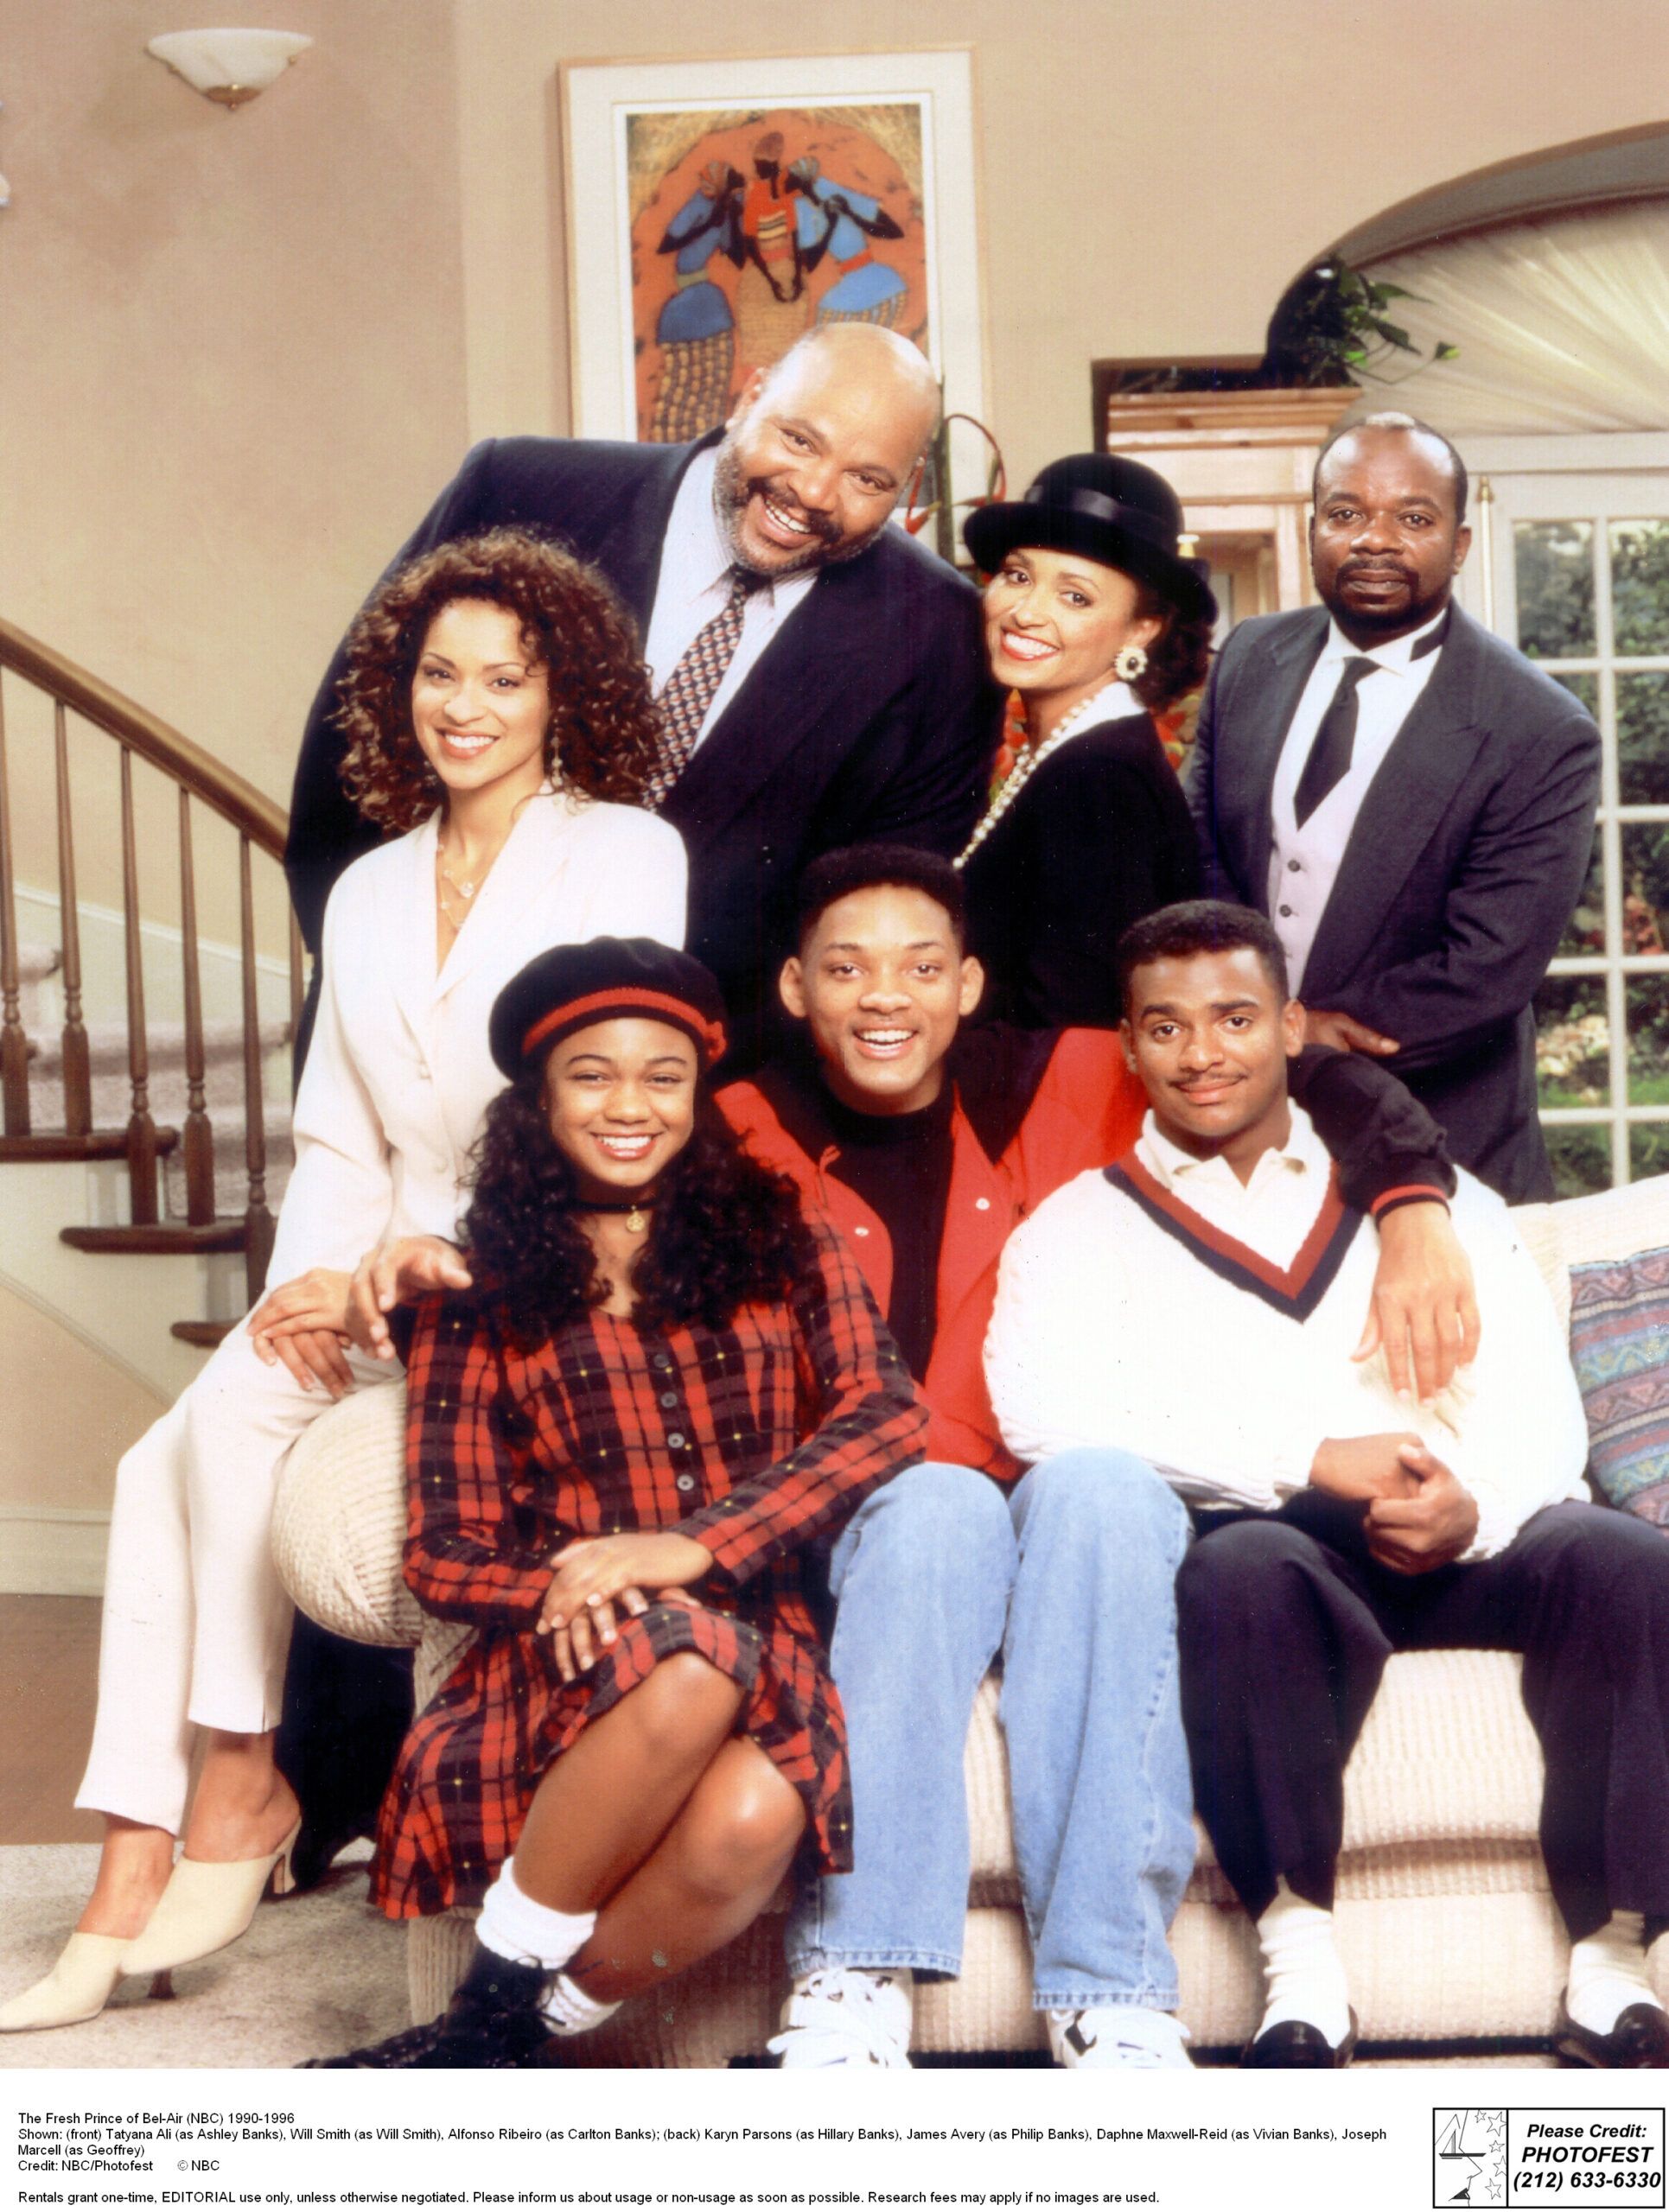 James Avery (top left) as Philip Banks on Fresh Prince of Bel-Air